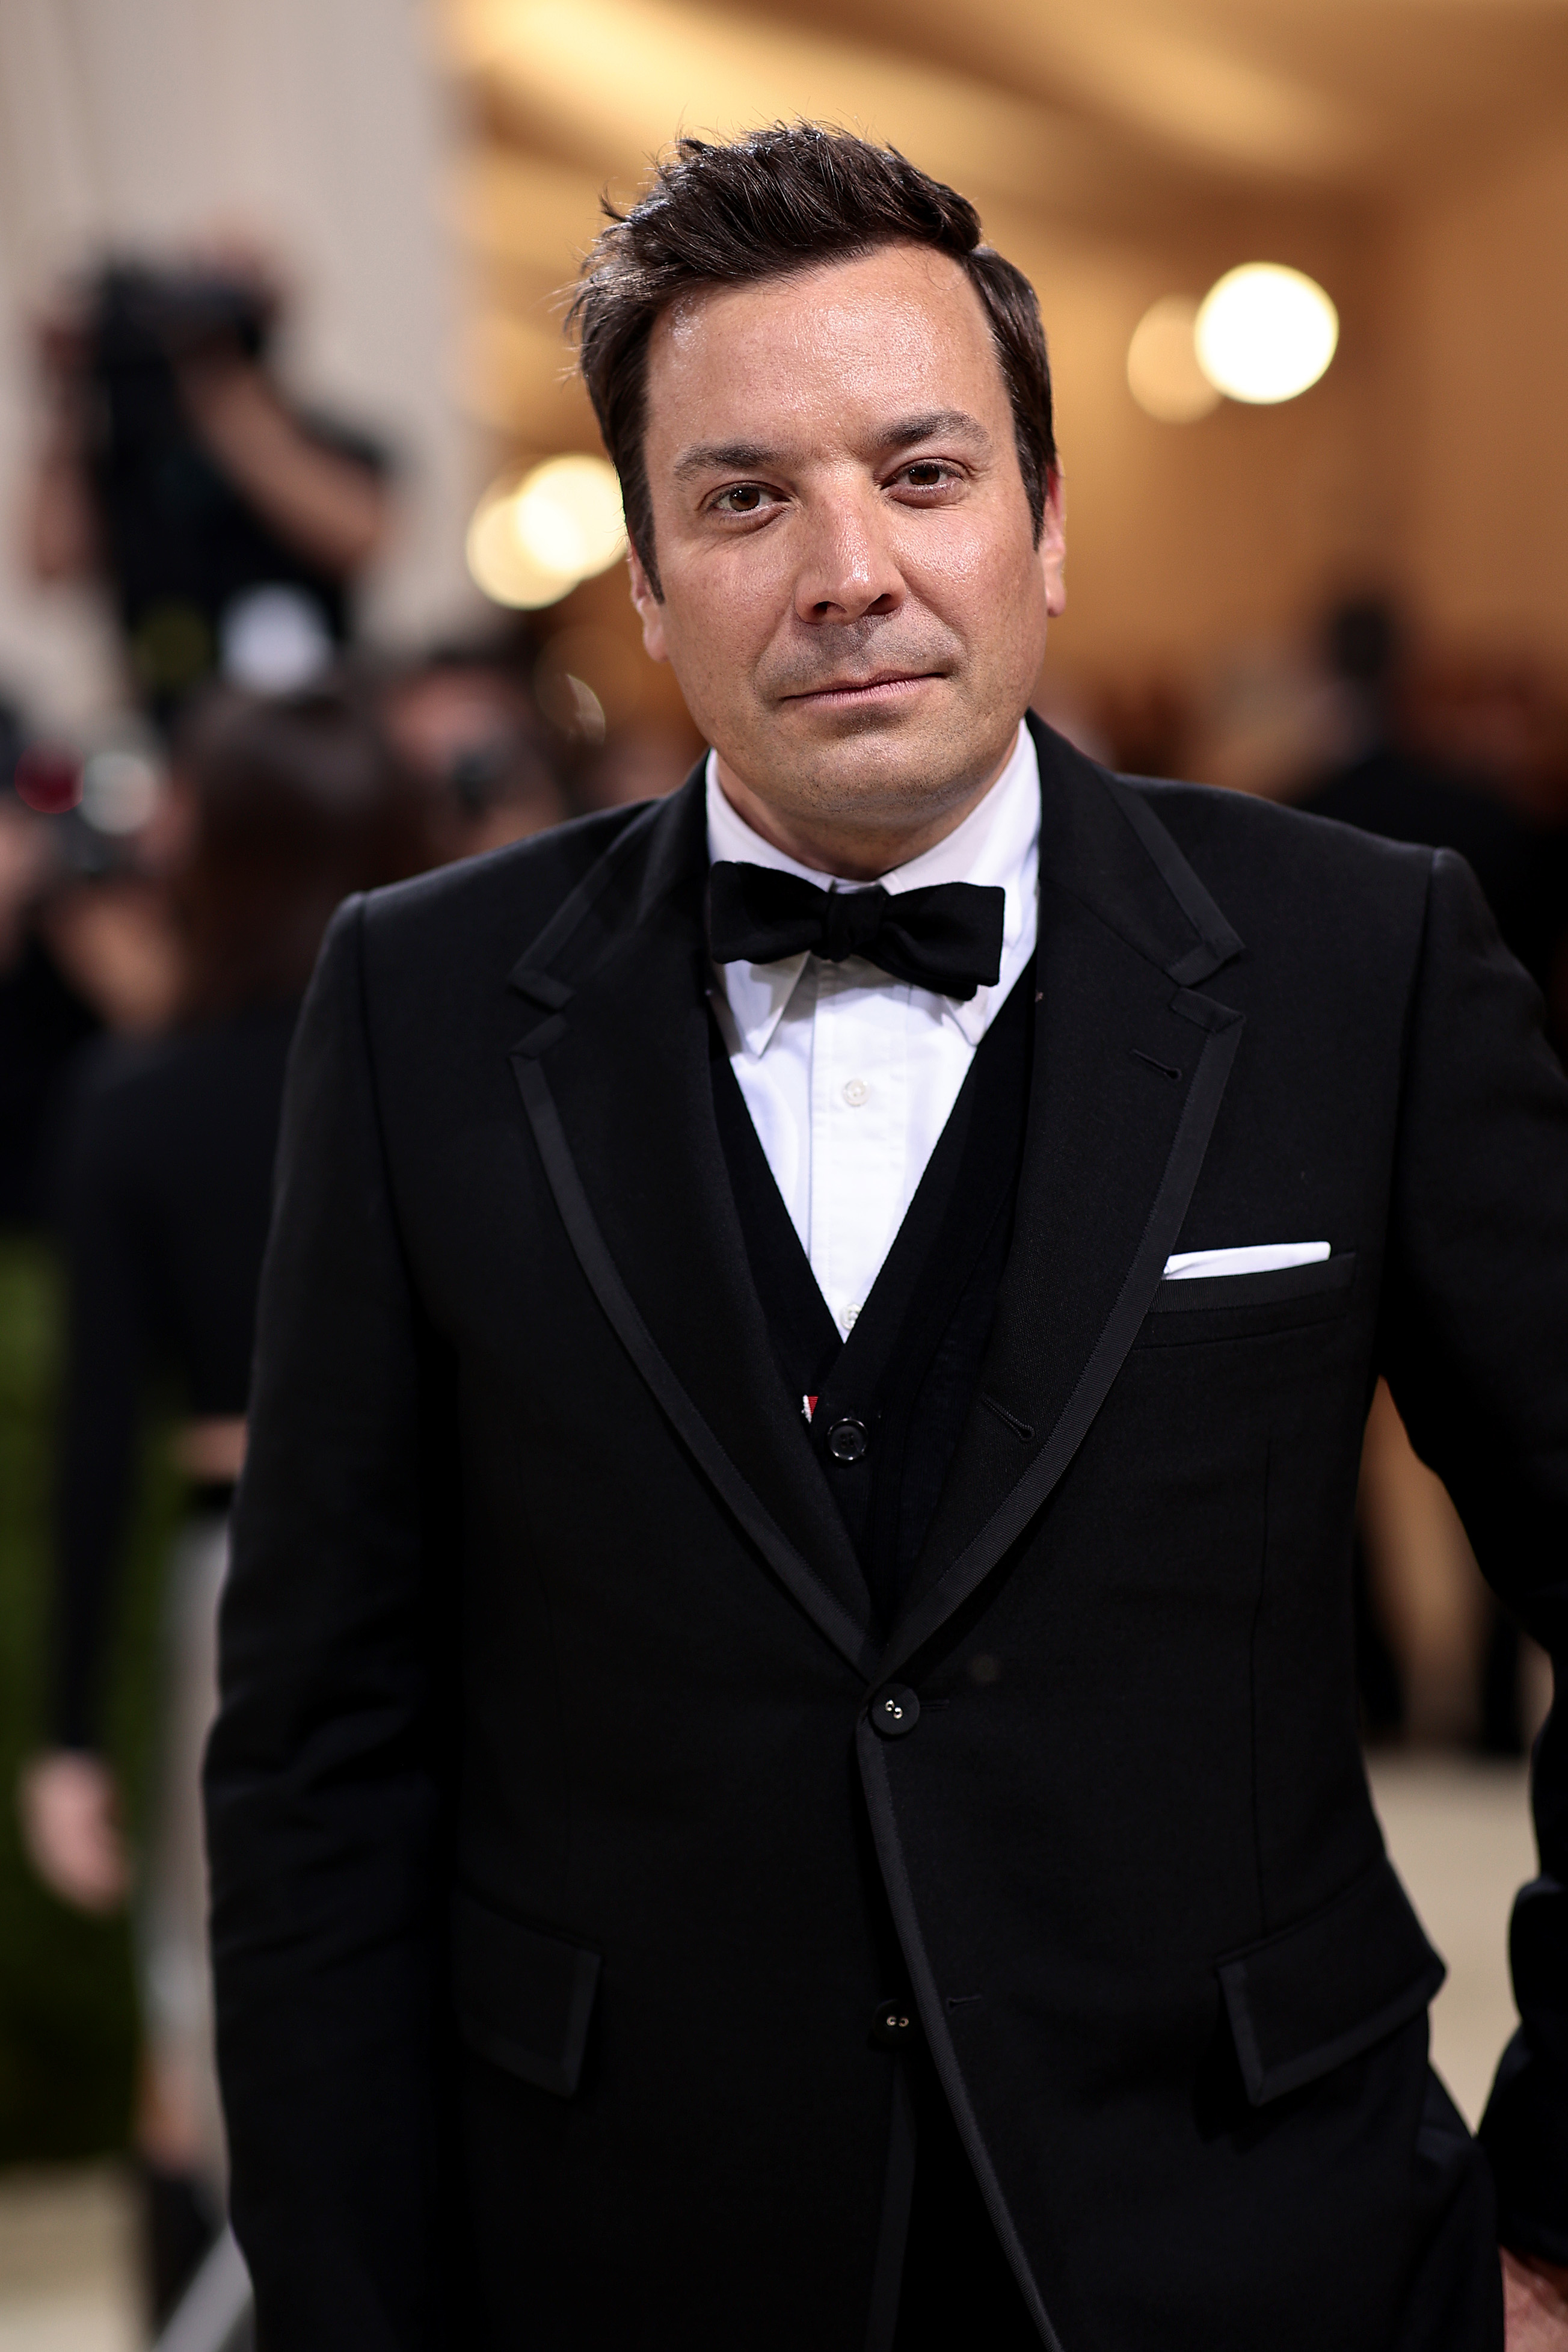 A close-up of Jimmy Fallon in a tuxedo